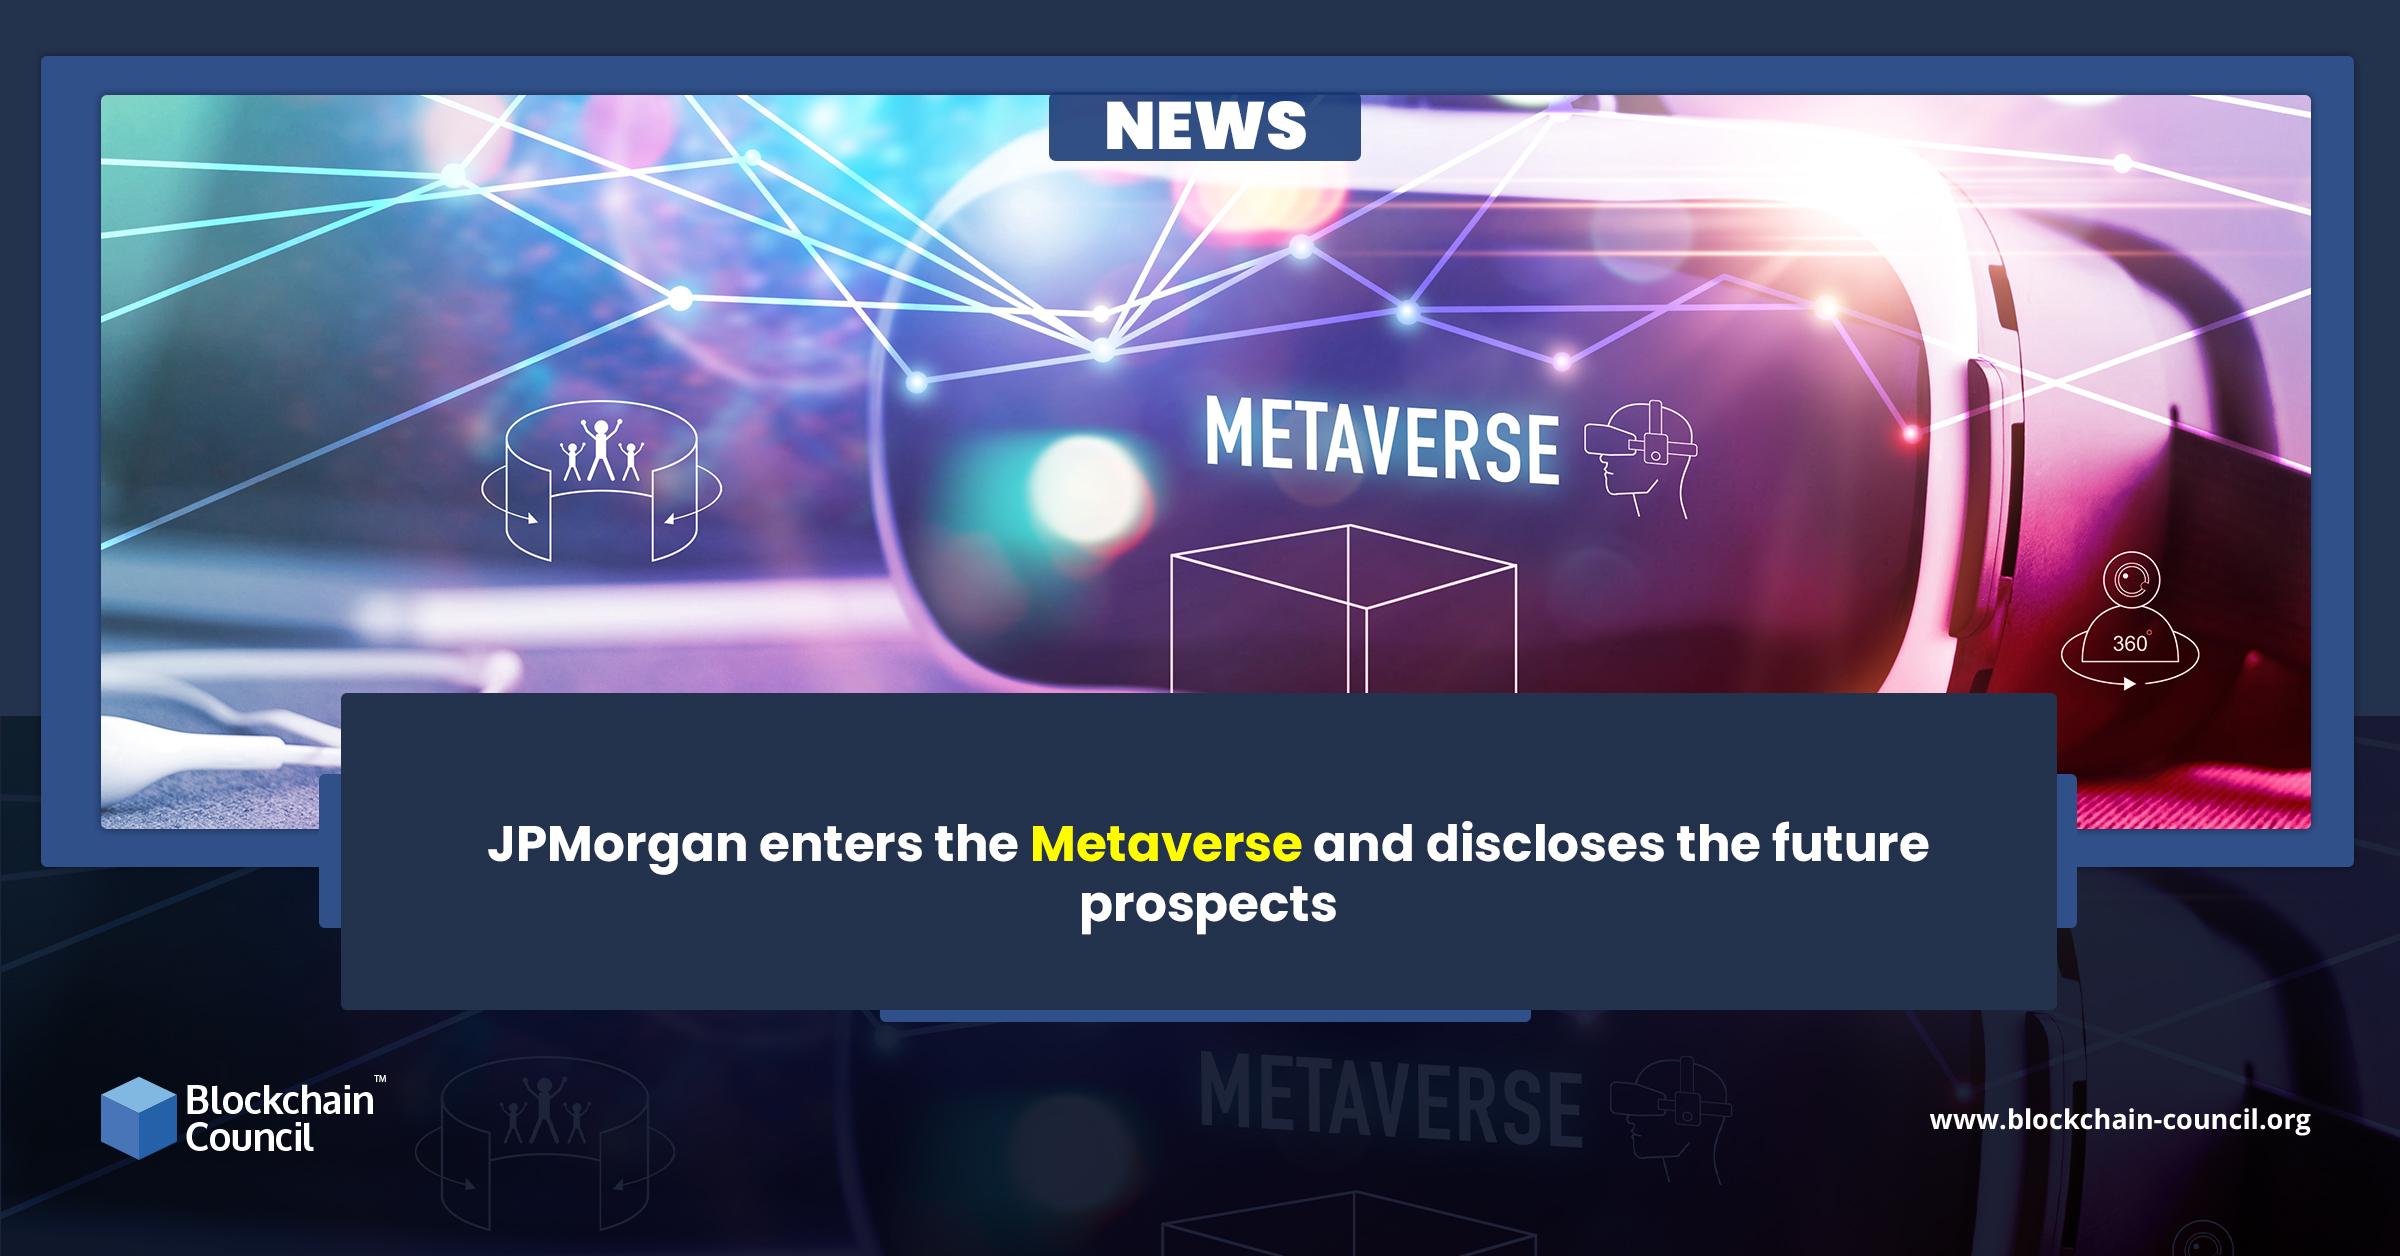 JPMorgan enters the Metaverse and discloses the future prospects